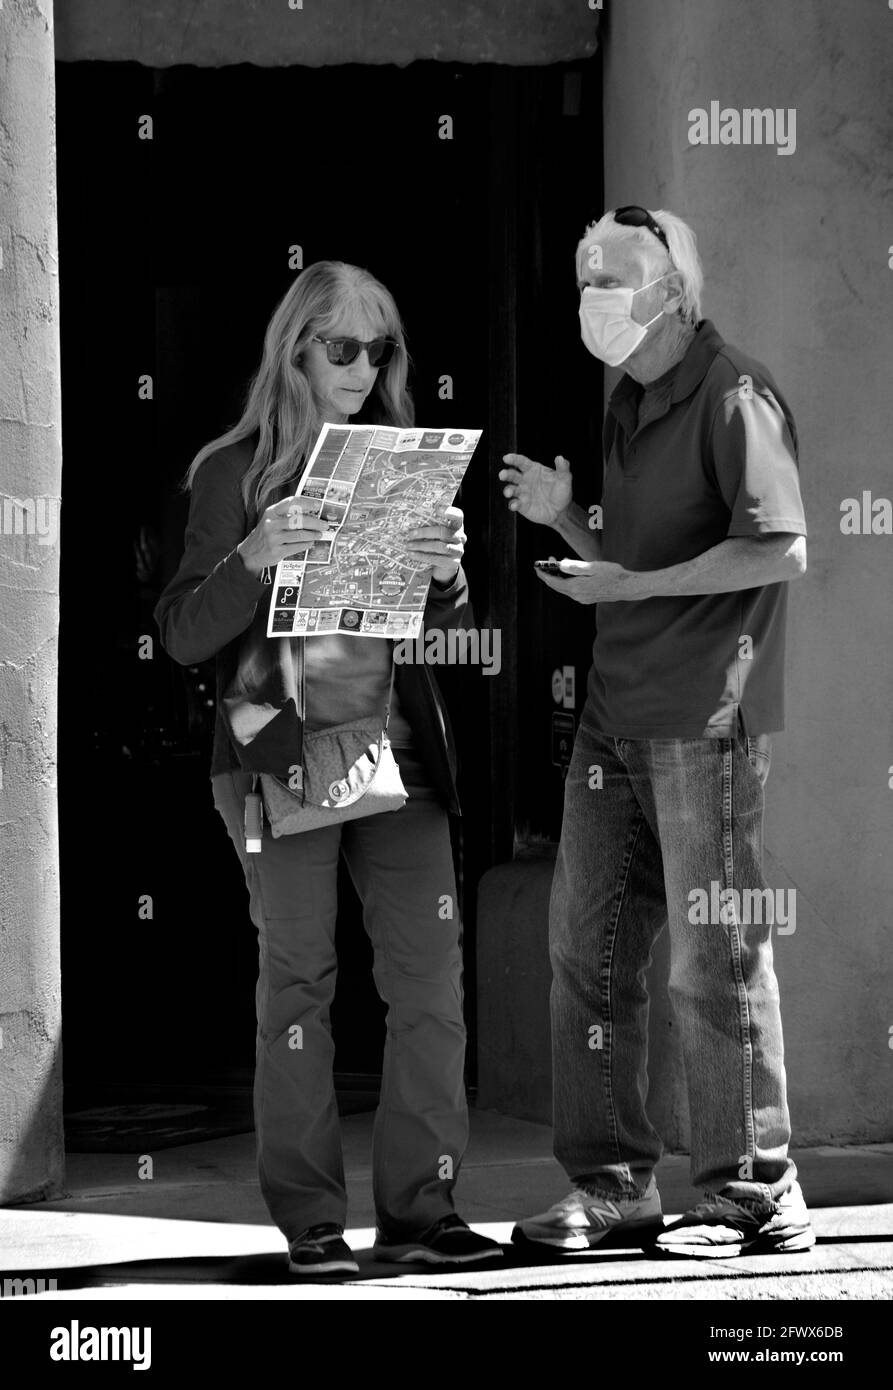 A couple visiting Santa Fe, New Mexico, consult an attractions map of the state capital city while standing outside a downtown art gallery. Stock Photo